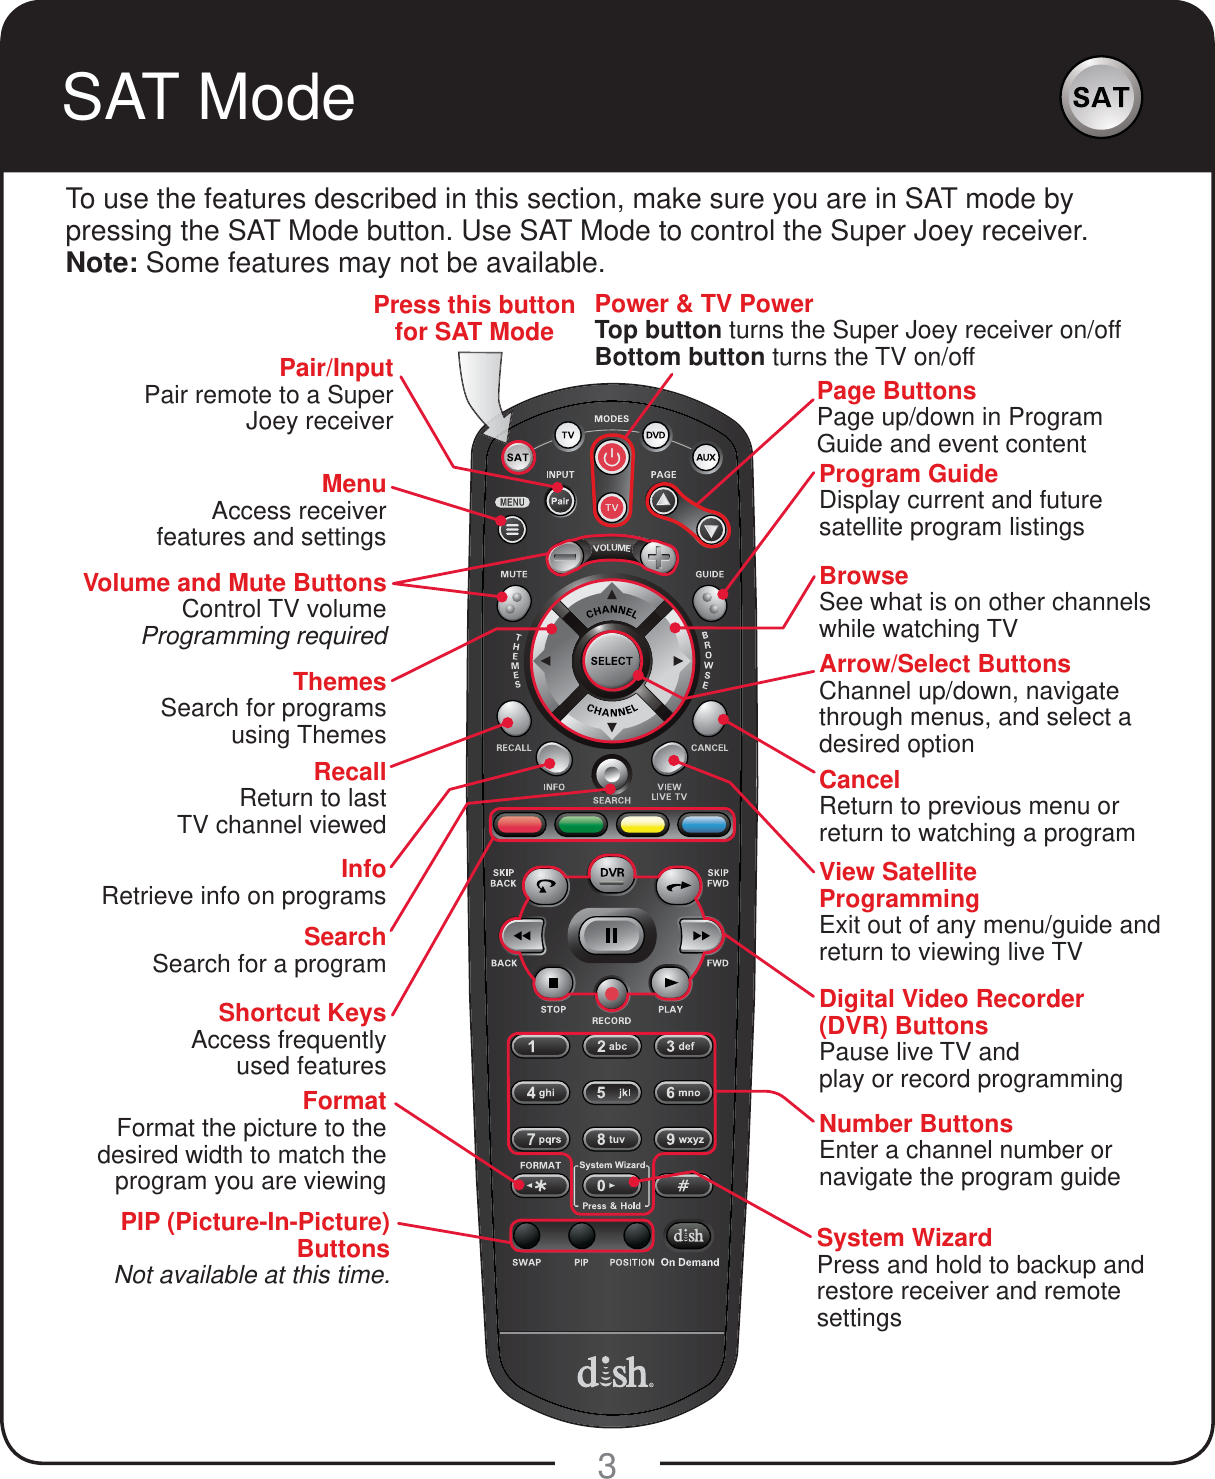 3To use the features described in this section, make sure you are in SAT mode by pressing the SAT Mode button. Use SAT Mode to control the Super Joey receiver.Note: Some features may not be available.SAT ModePower &amp; TV PowerTop button turns the Super Joey receiver on/offBottom button turns the TV on/offVolume and Mute ButtonsControl TV volumeProgramming requiredRecallReturn to last TV channel viewedPIP (Picture-In-Picture) ButtonsNot available at this time.Number ButtonsEnter a channel number or navigate the program guideMenuAccess receiverfeatures and settingsThemesSearch for programs using ThemesInfoRetrieve info on programsSearchSearch for a programShortcut KeysAccess frequently used featuresDigital Video Recorder (DVR) ButtonsPause live TV and play or record programmingFormatFormat the picture to the desired width to match the program you are viewingSystem WizardPress and hold to backup and restore receiver and remotesettingsArrow/Select ButtonsChannel up/down, navigate through menus, and select a desired optionView SatelliteProgrammingExit out of any menu/guide and return to viewing live TVCancelReturn to previous menu or return to watching a programBrowseSee what is on other channels while watching TVProgram GuideDisplay current and future satellite program listingsPage ButtonsPage up/down in Program Guide and event contentPress this button for SAT ModePair/InputPair remote to a Super Joey receiver